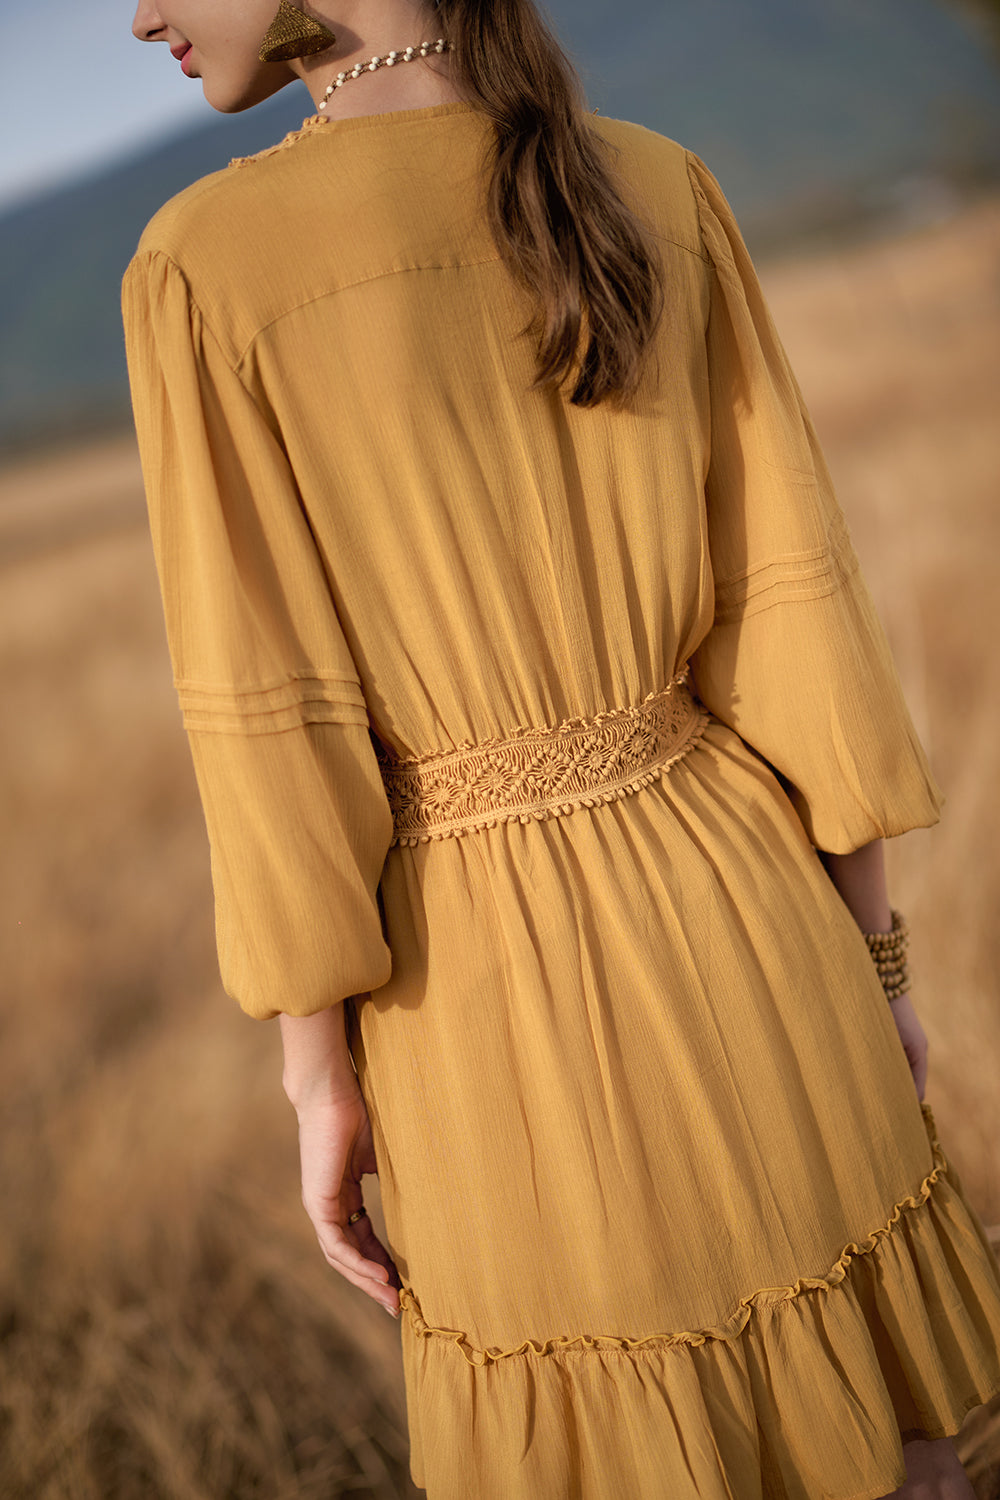 Maribelle Dress - Saffron Gold - The Fields of Gold by Tulle and Batiste